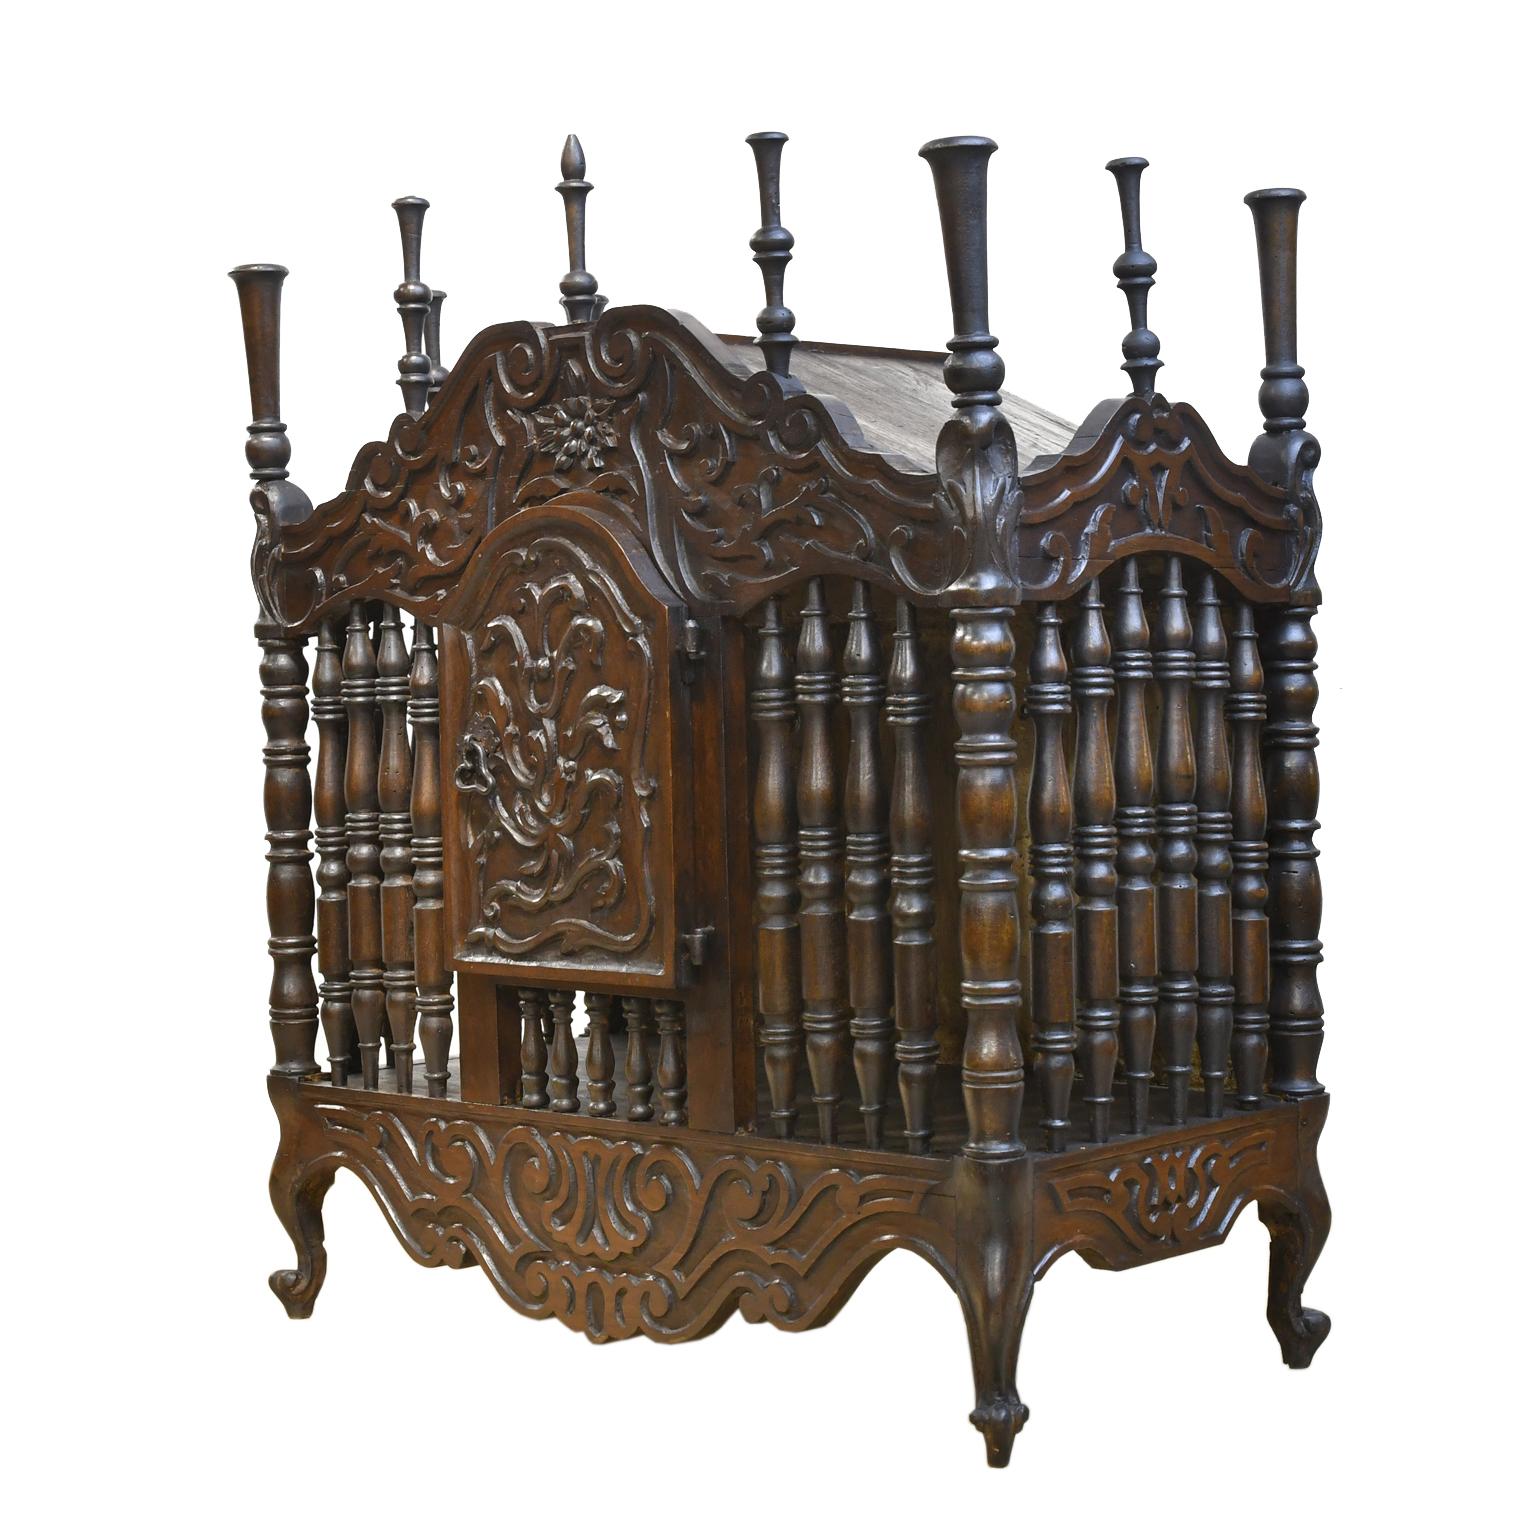 A very charming and rustic French Provincial bread cupboard or panetière in French chestnut. France, circa 1800s. This highly decorated box intended for storing bread has an arched bonnet, cabinet door and aprons embellished with floral, foliate and